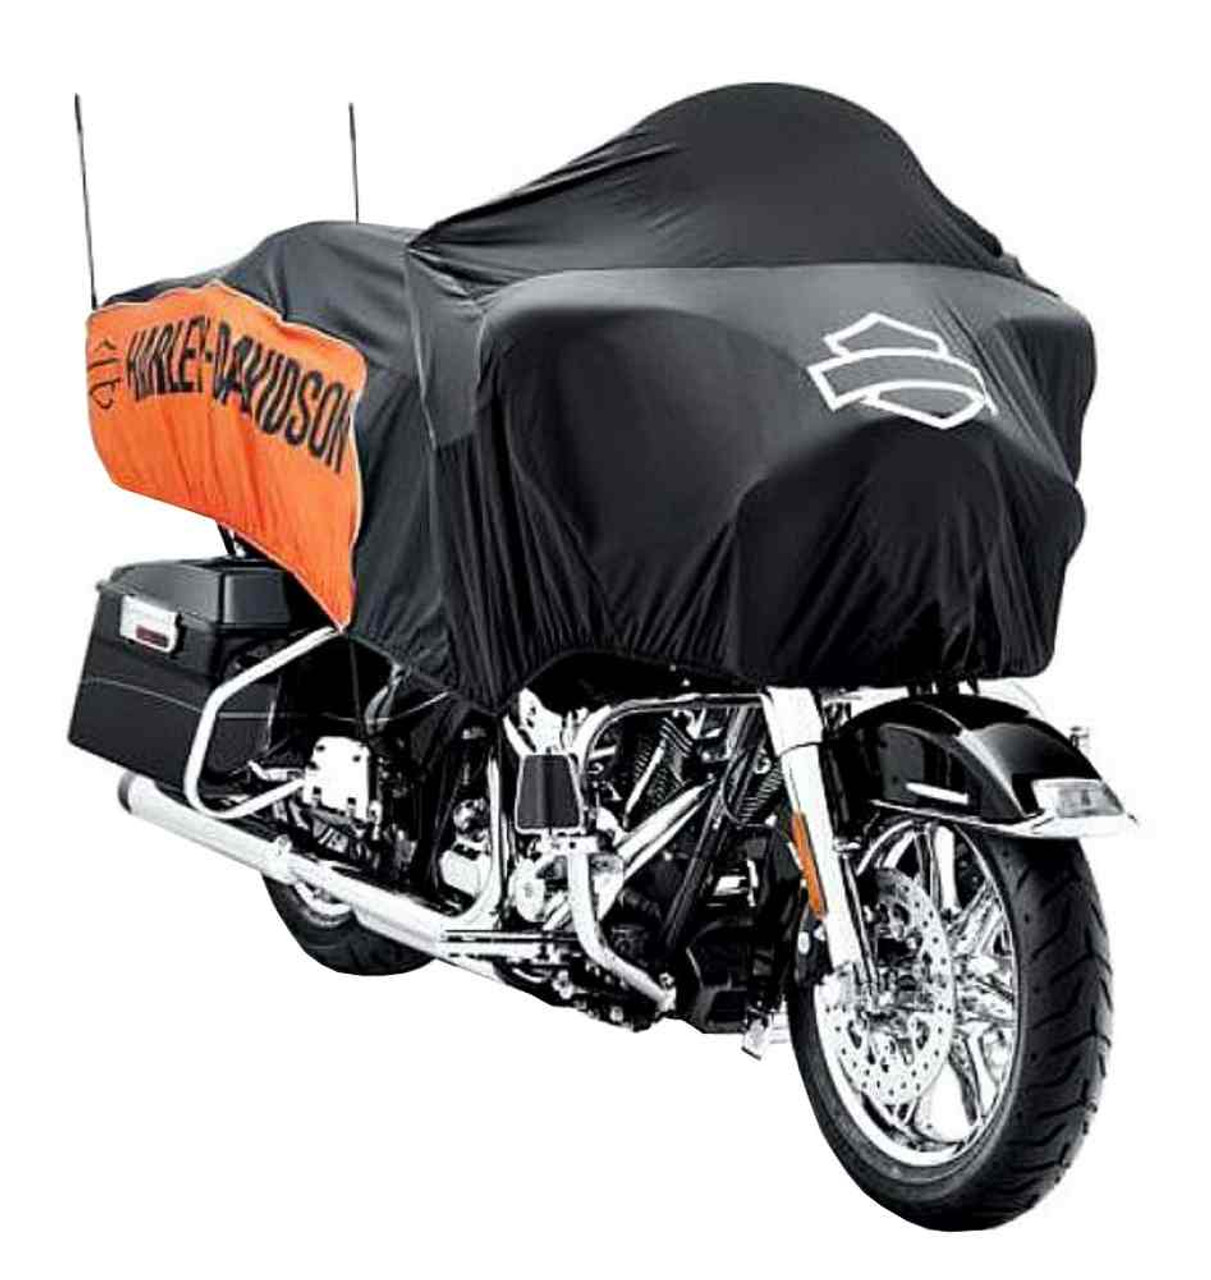 harley davidson motorcycle covers